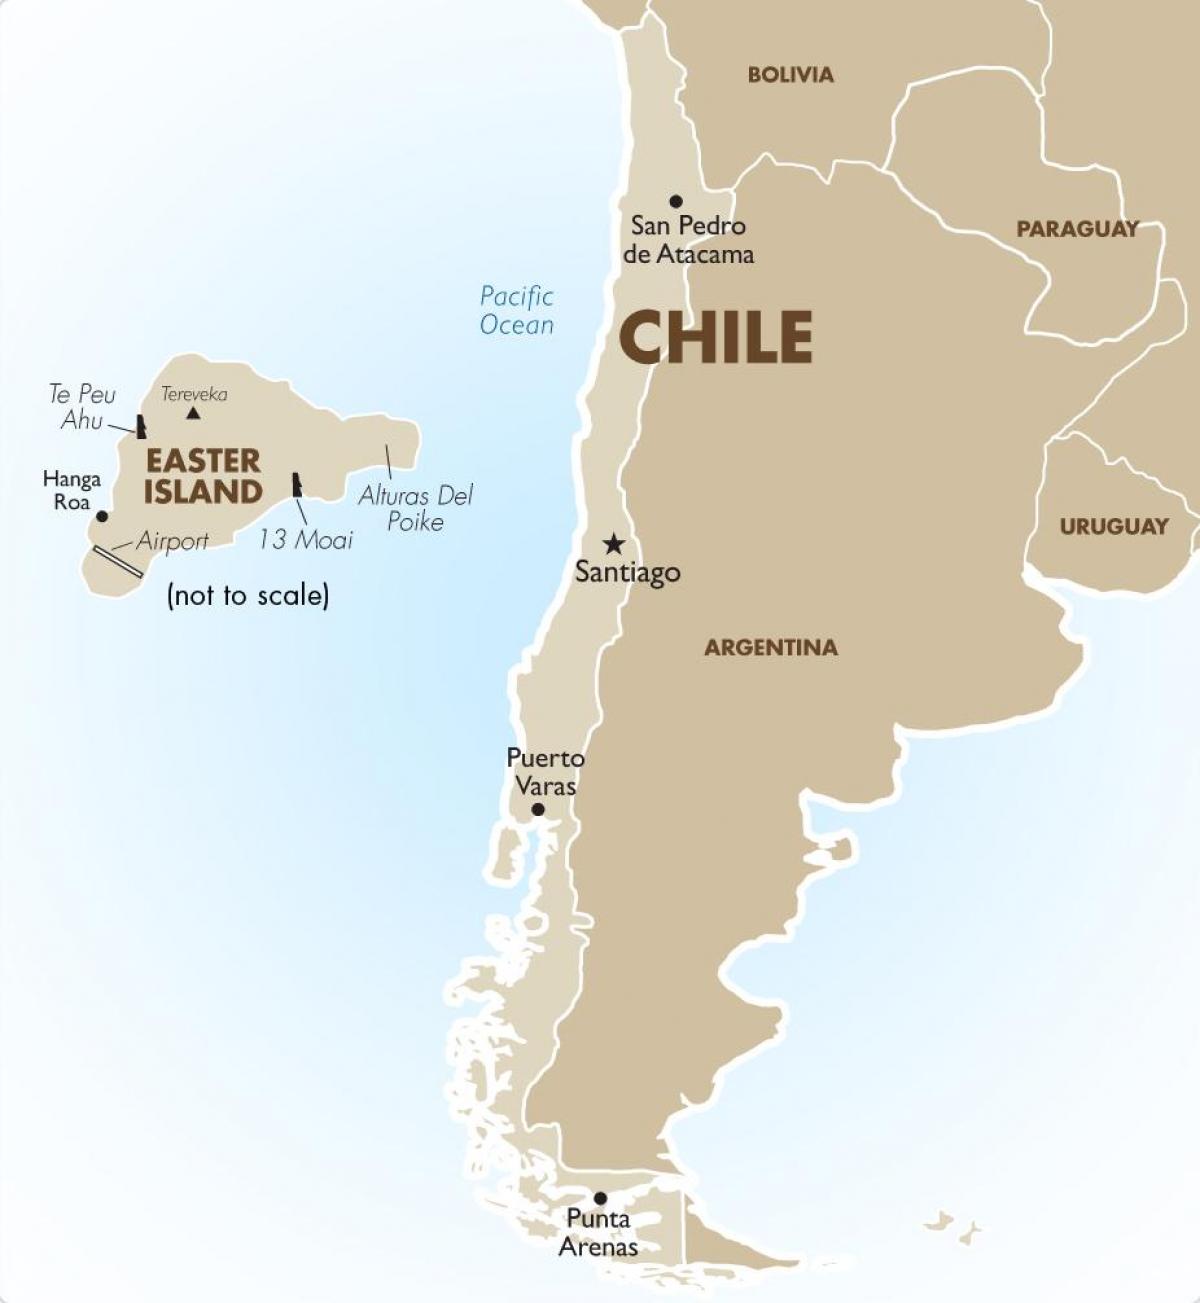 Chile's map